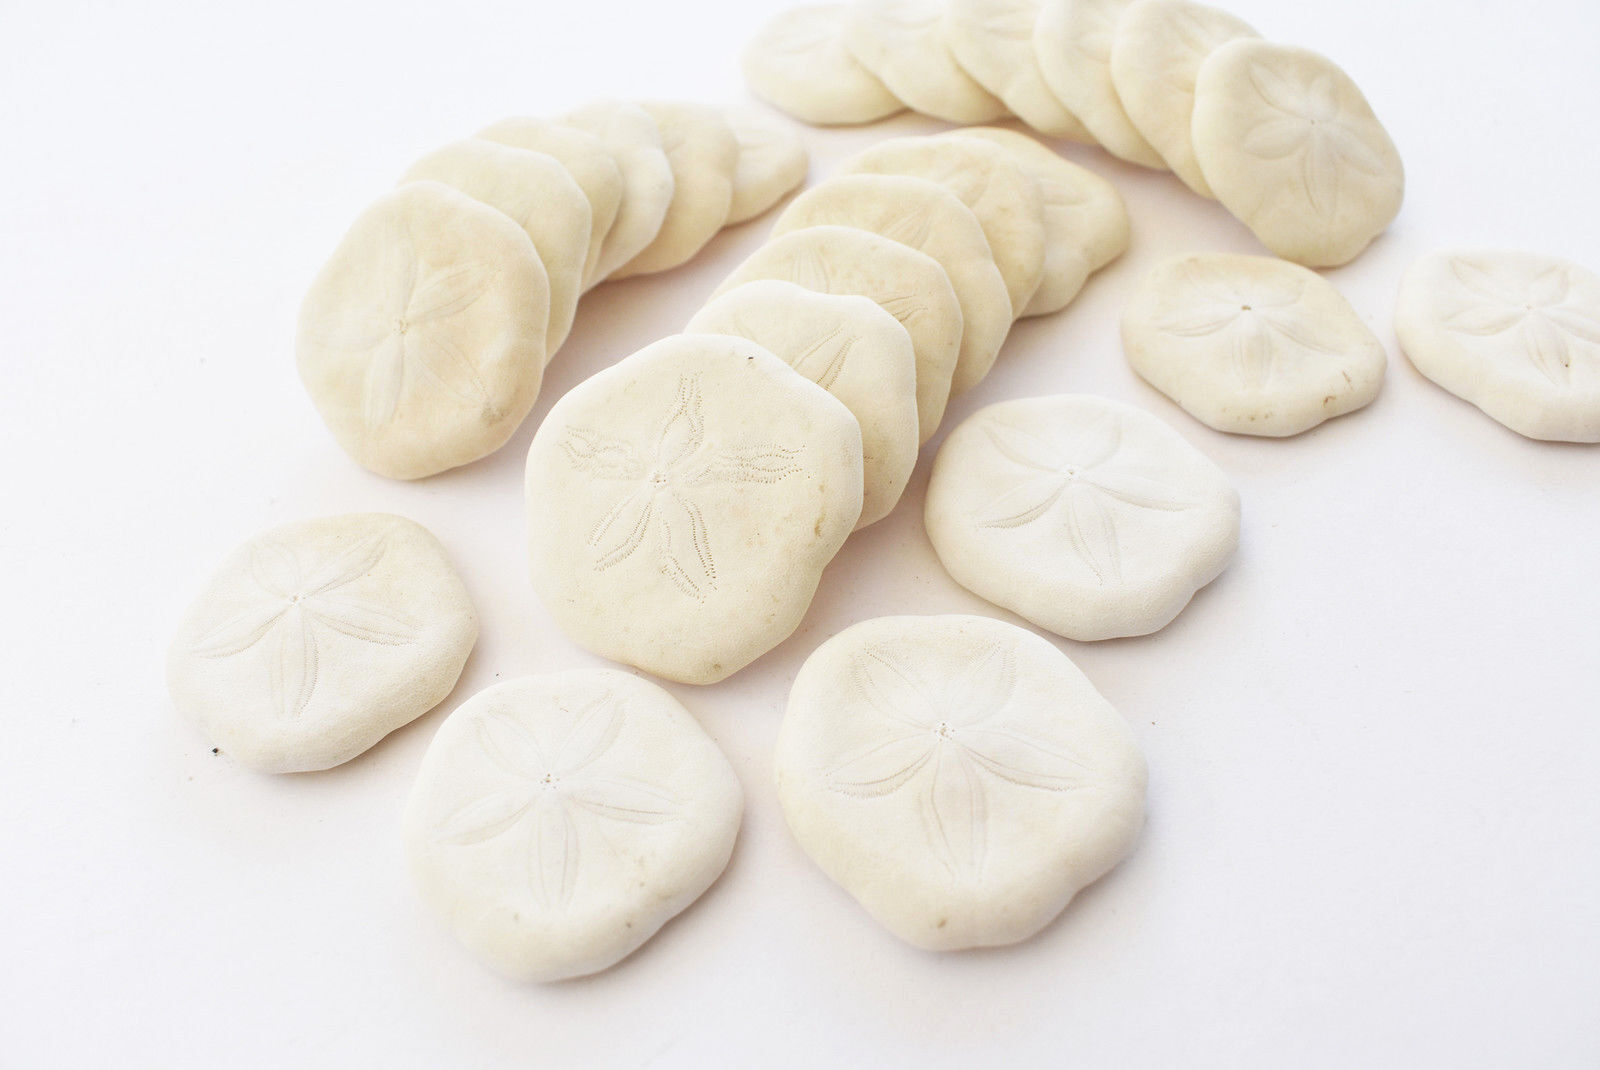 25 White Baby Sea Biscuits (Sea Cookies) 1-1 1/2\